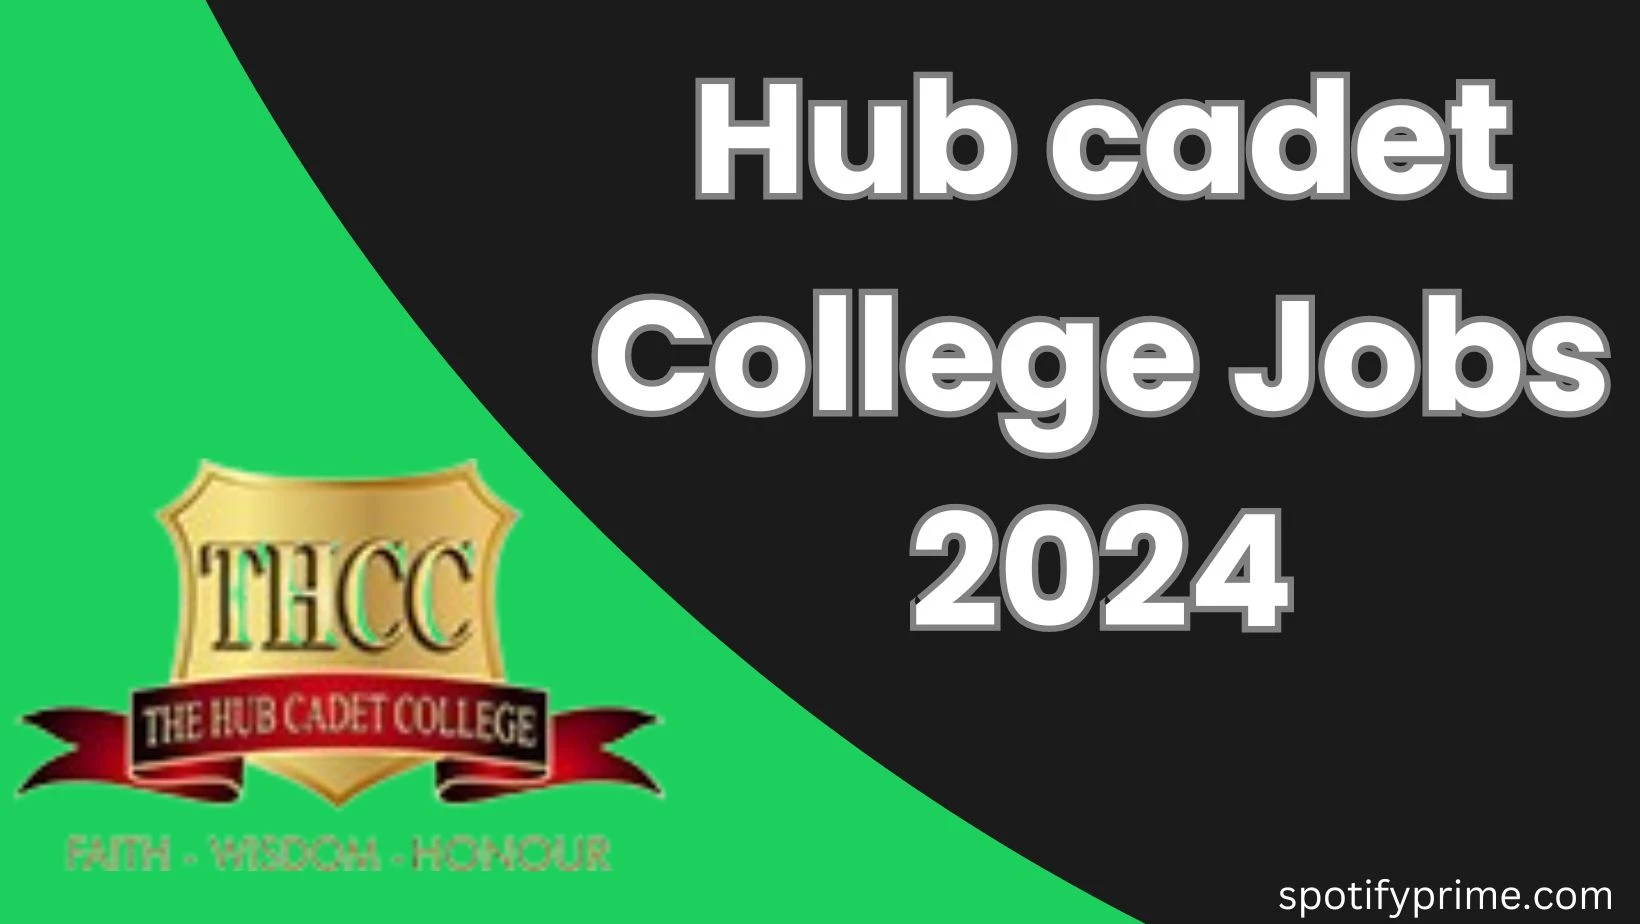 How to Apply for Hub cadet College Jobs